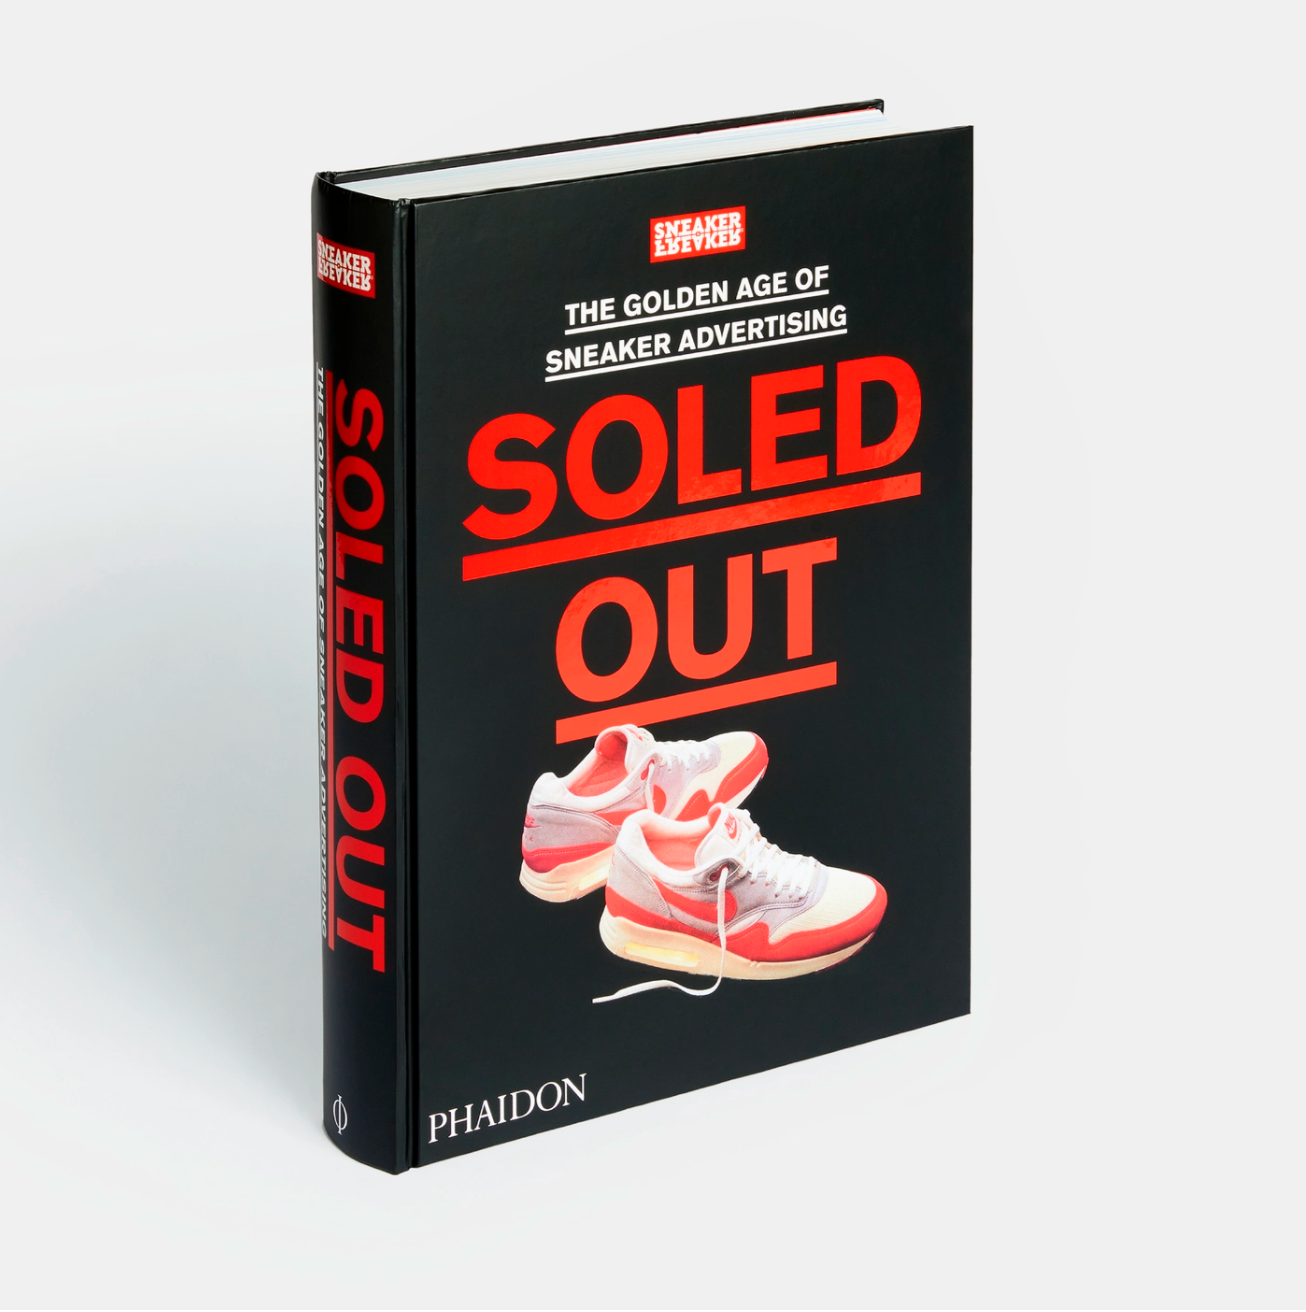 Soled Out: The Golden Age of Sneaker Advertising Hardcover